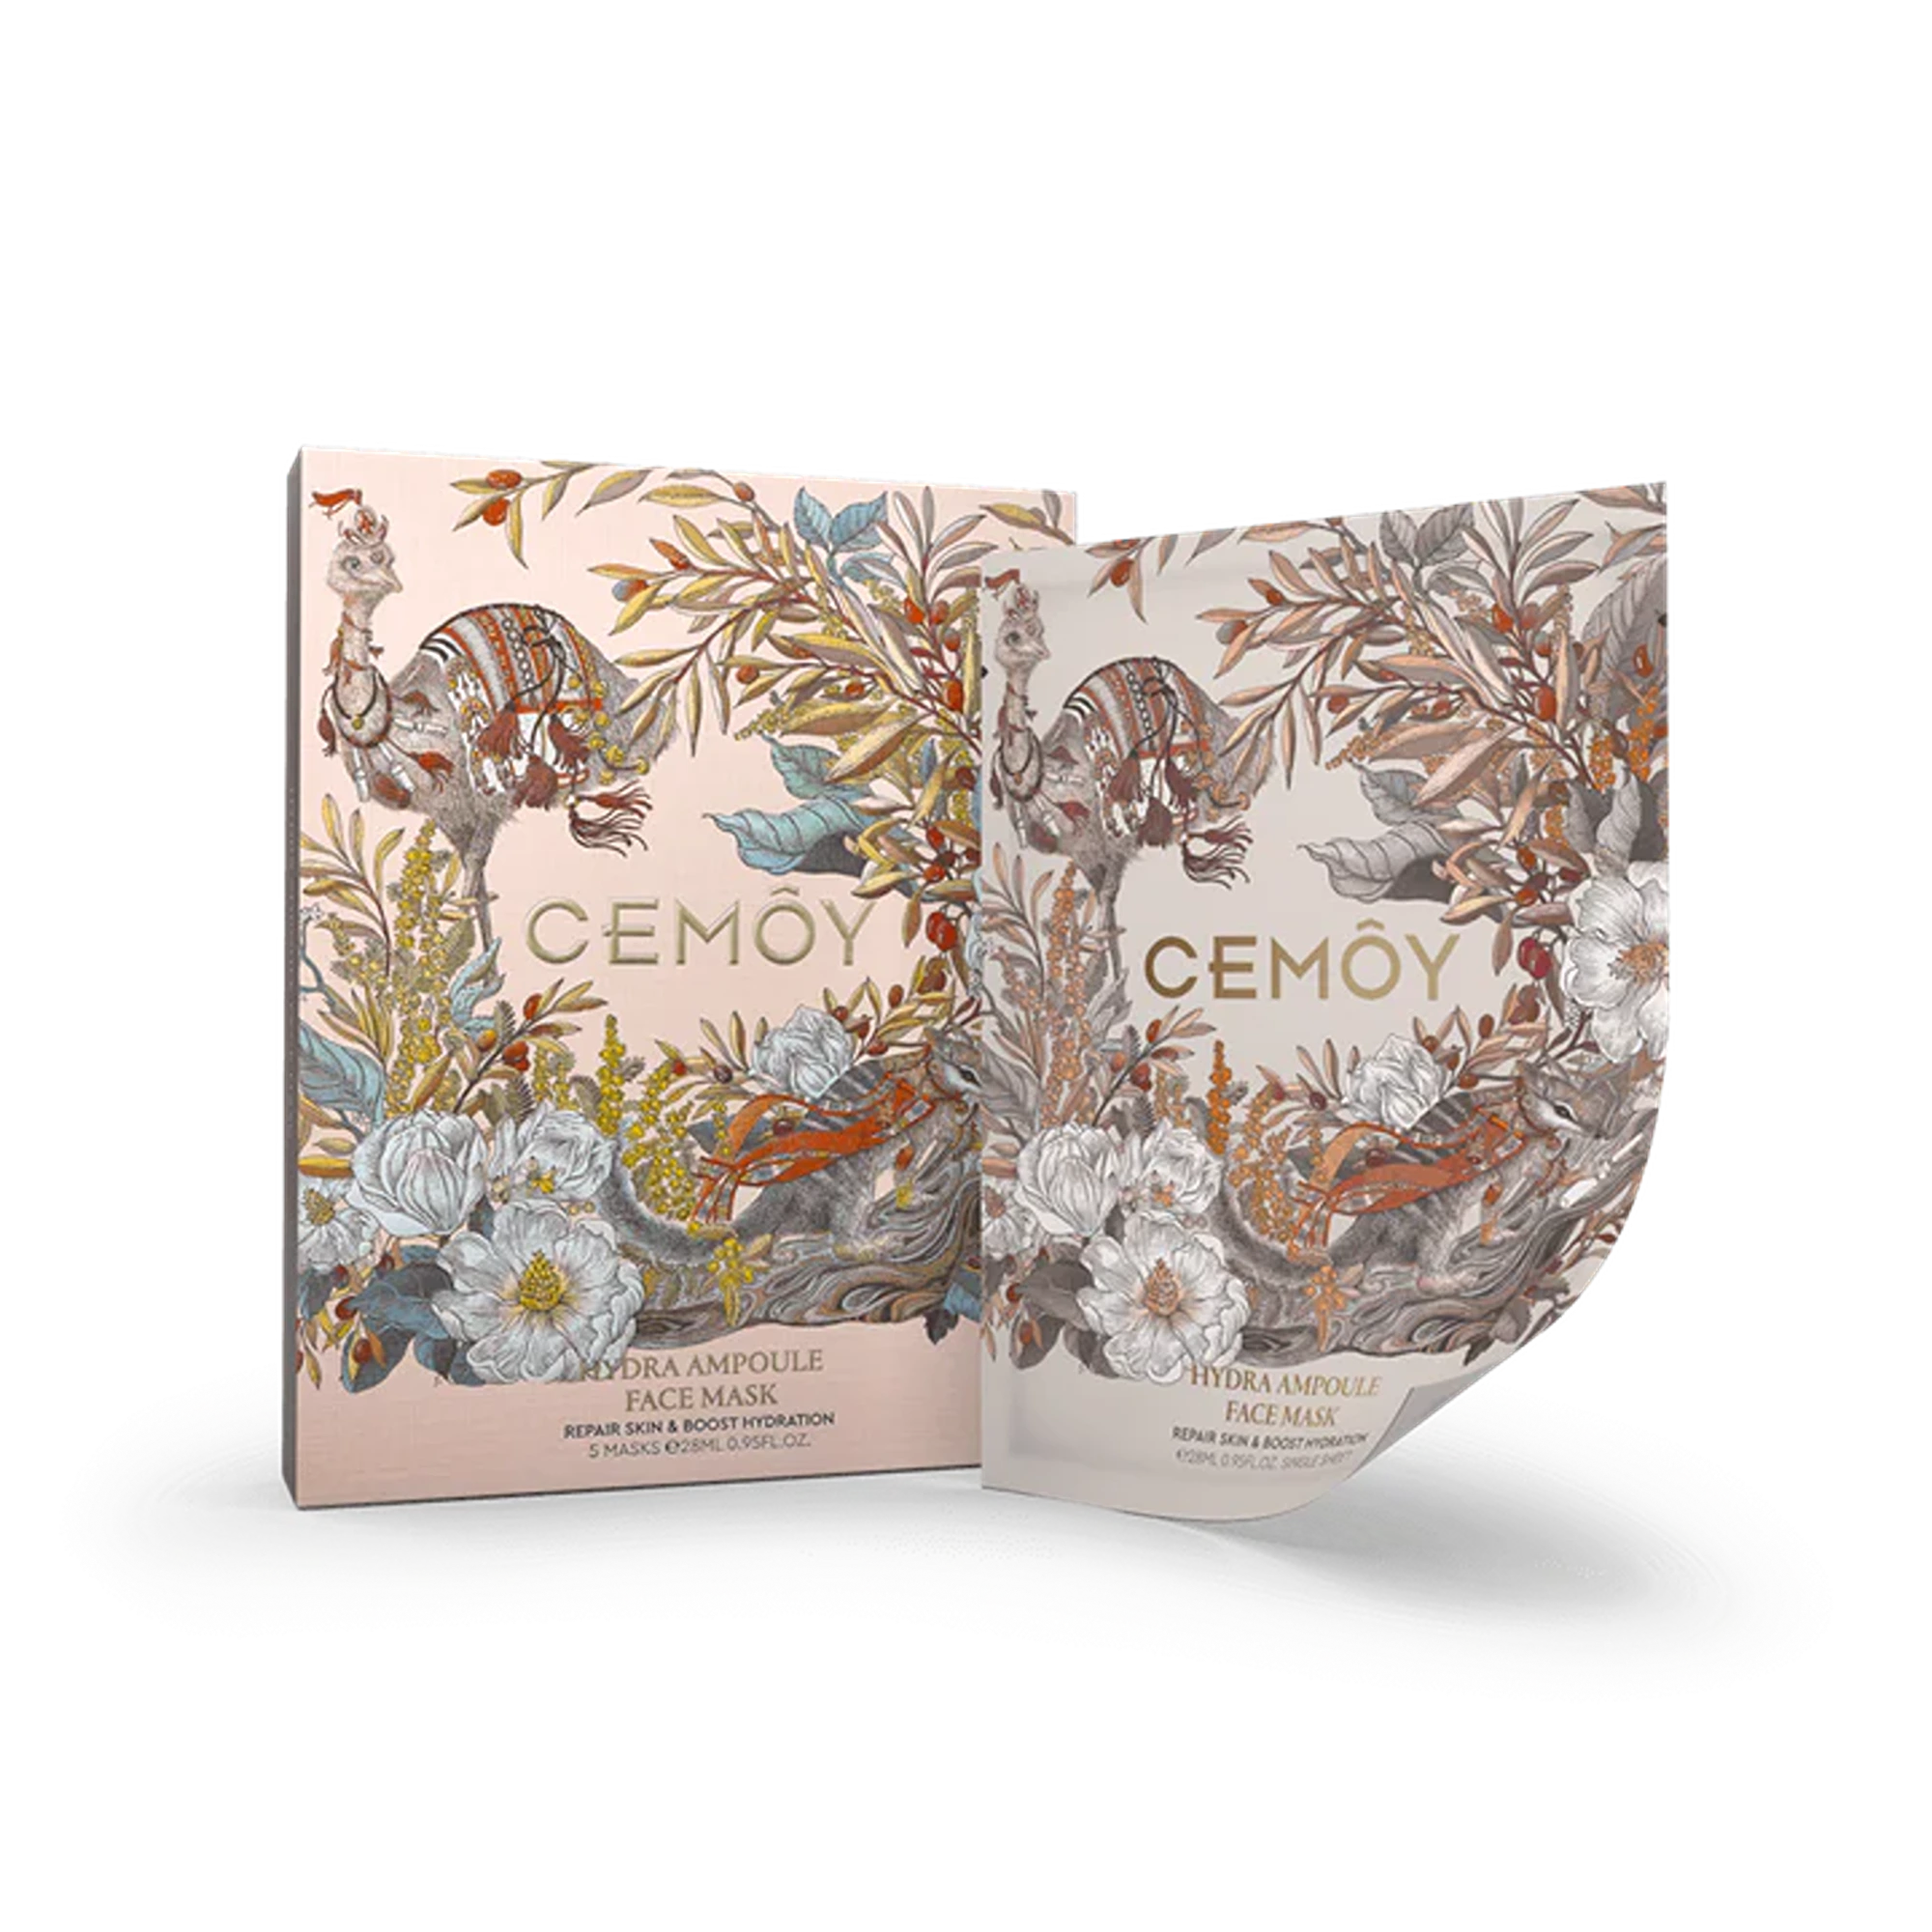 CEMOY Hydra Ampoule Face Mask 5 Pack